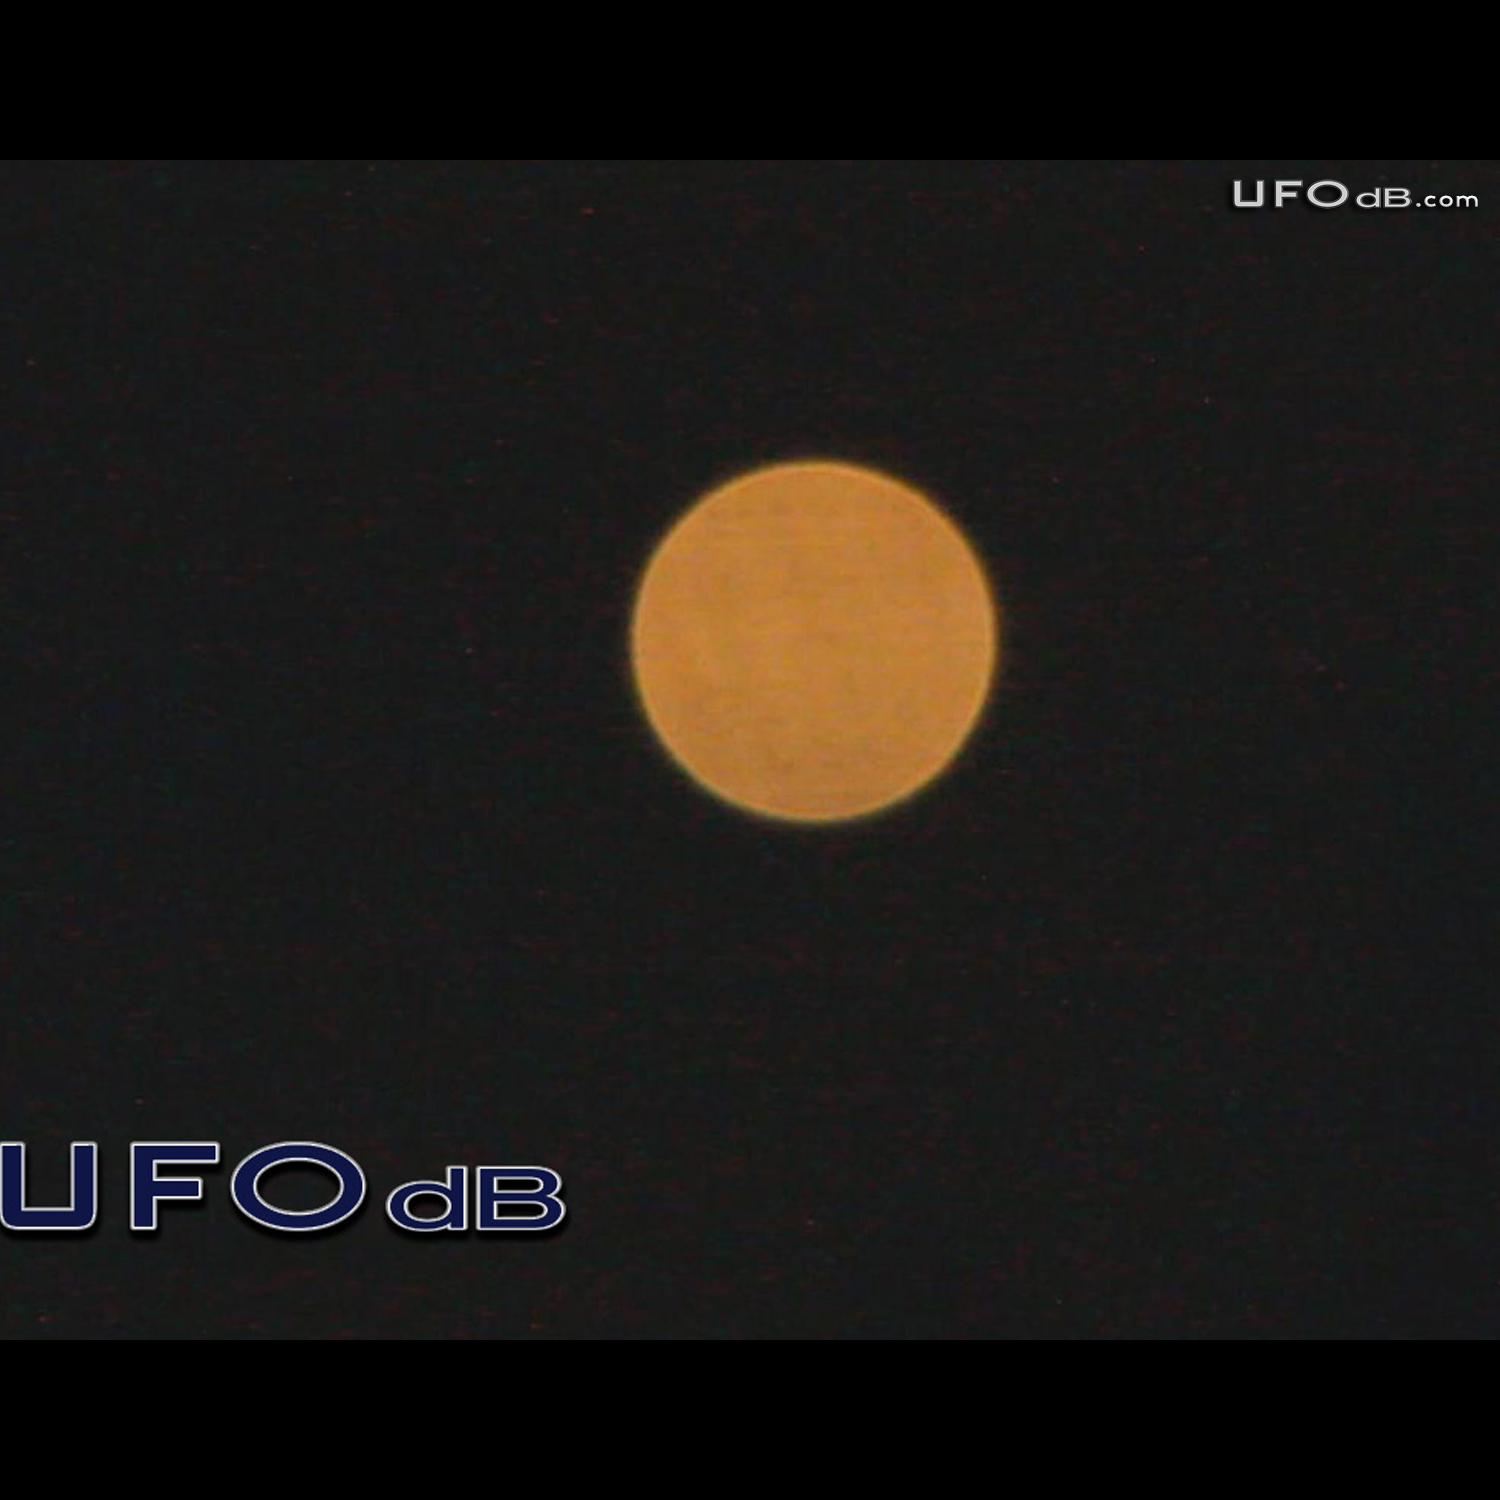 Perfect Orange Sphere UFO in Longueuil, Quebec, Canada | March 20 2011 UFO Picture #316-2